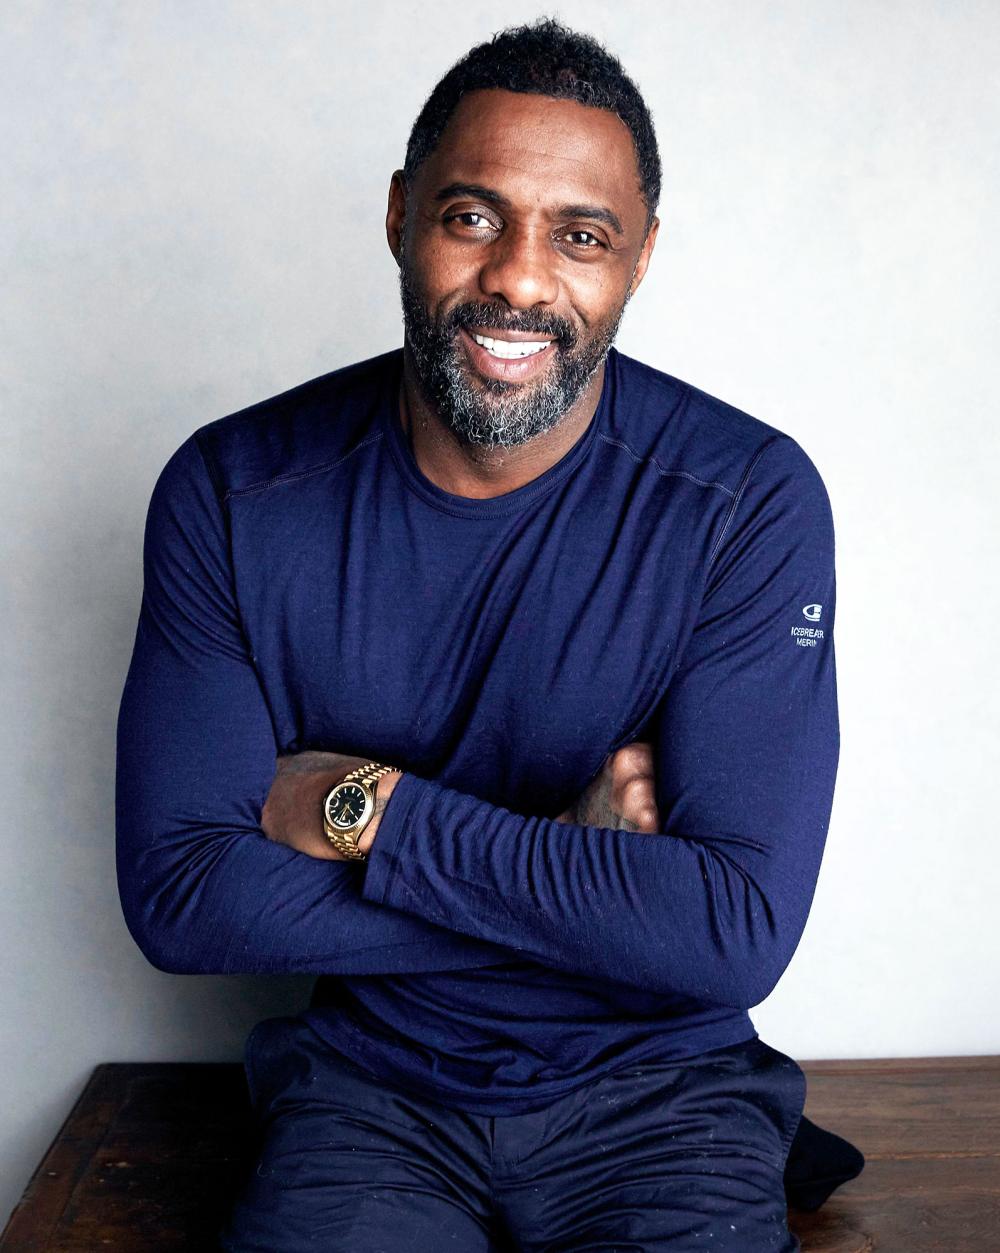 Idris Elba Did Not Welcome Second Son and Was Referring to Godson